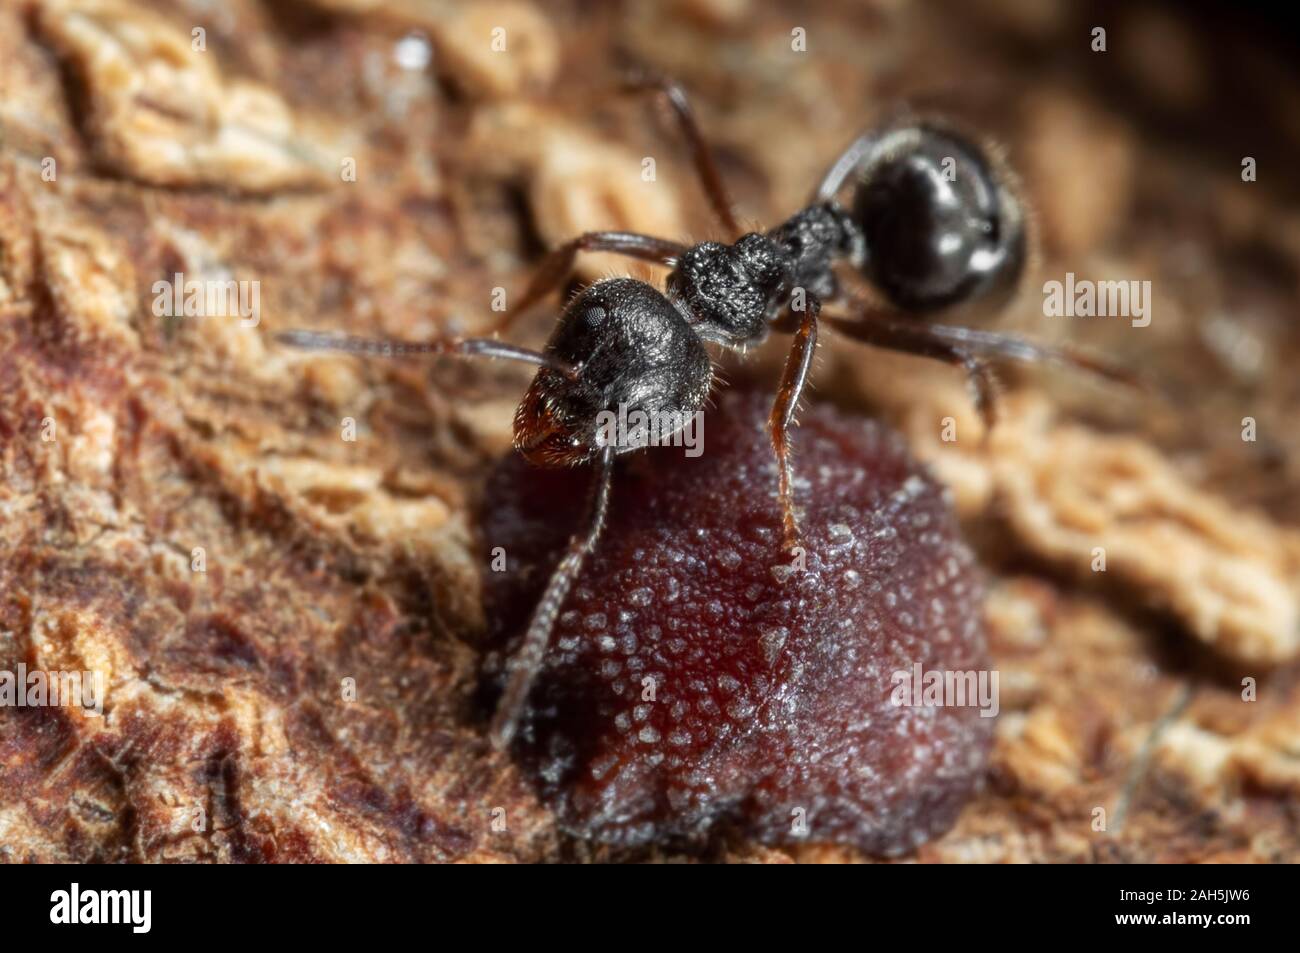 Macro Photography of Black Garden Ant with Scale Insect on Tree Bark Stock Photo